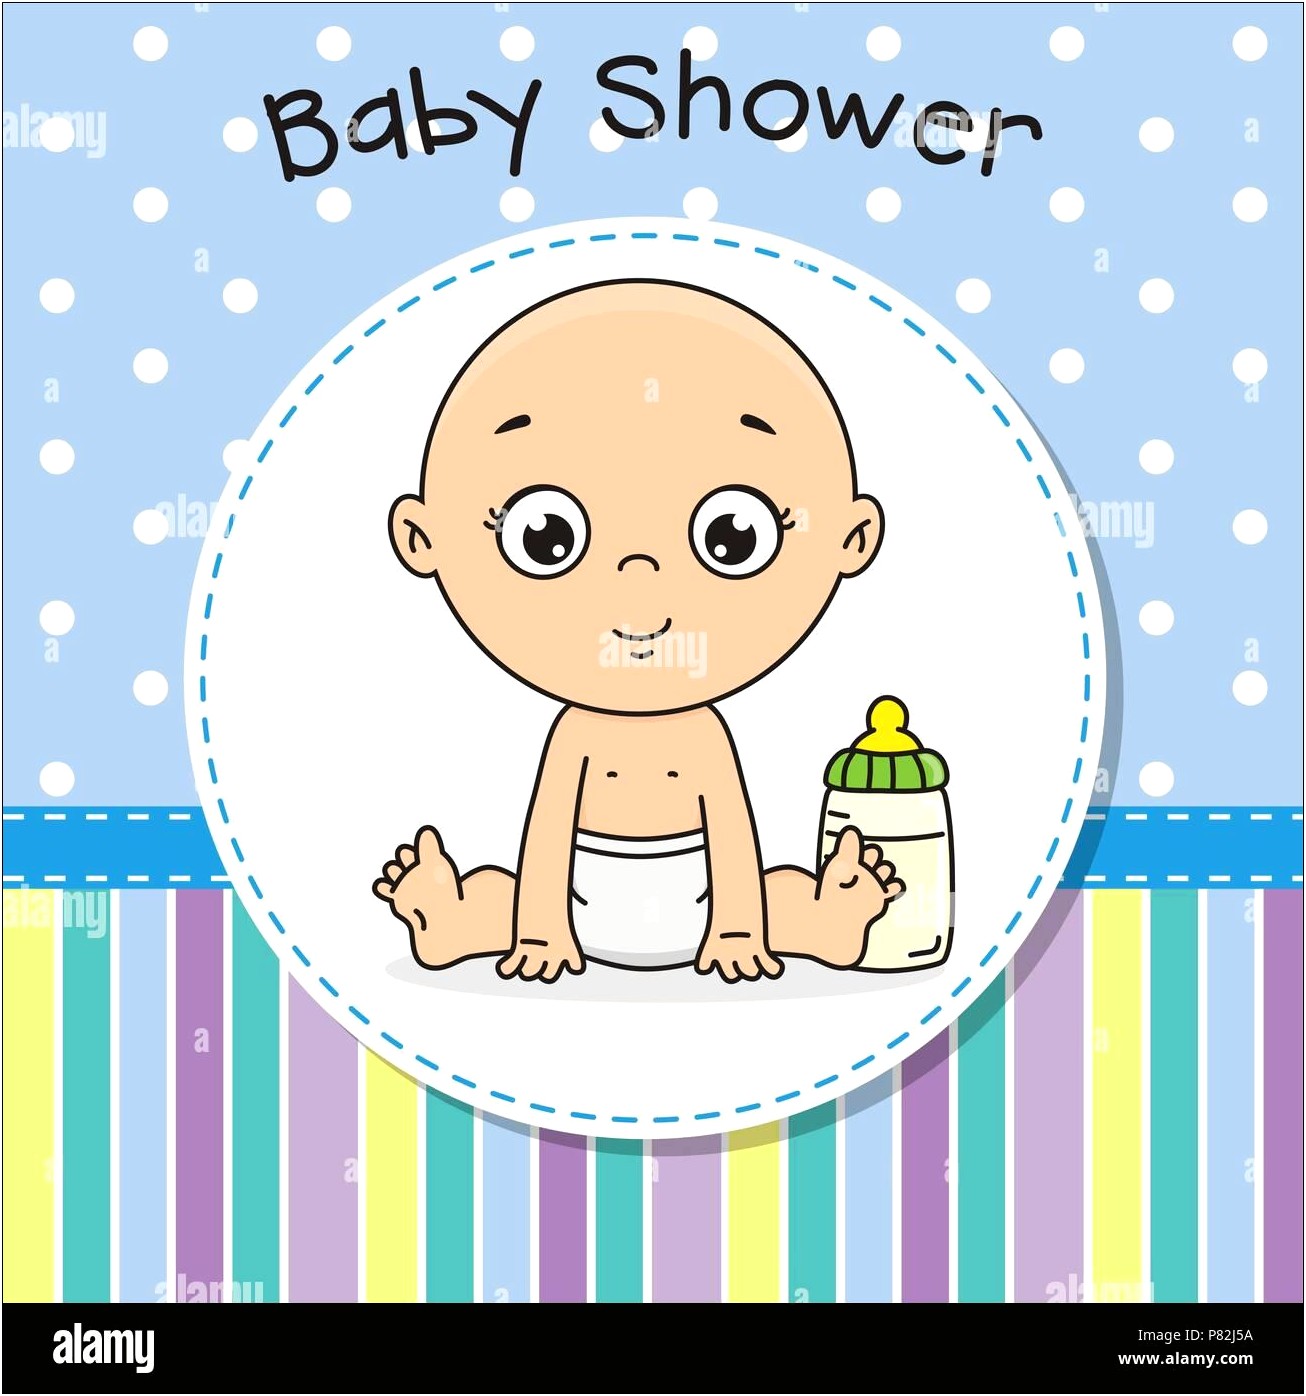 Free Pin The Dummy On The Baby Template